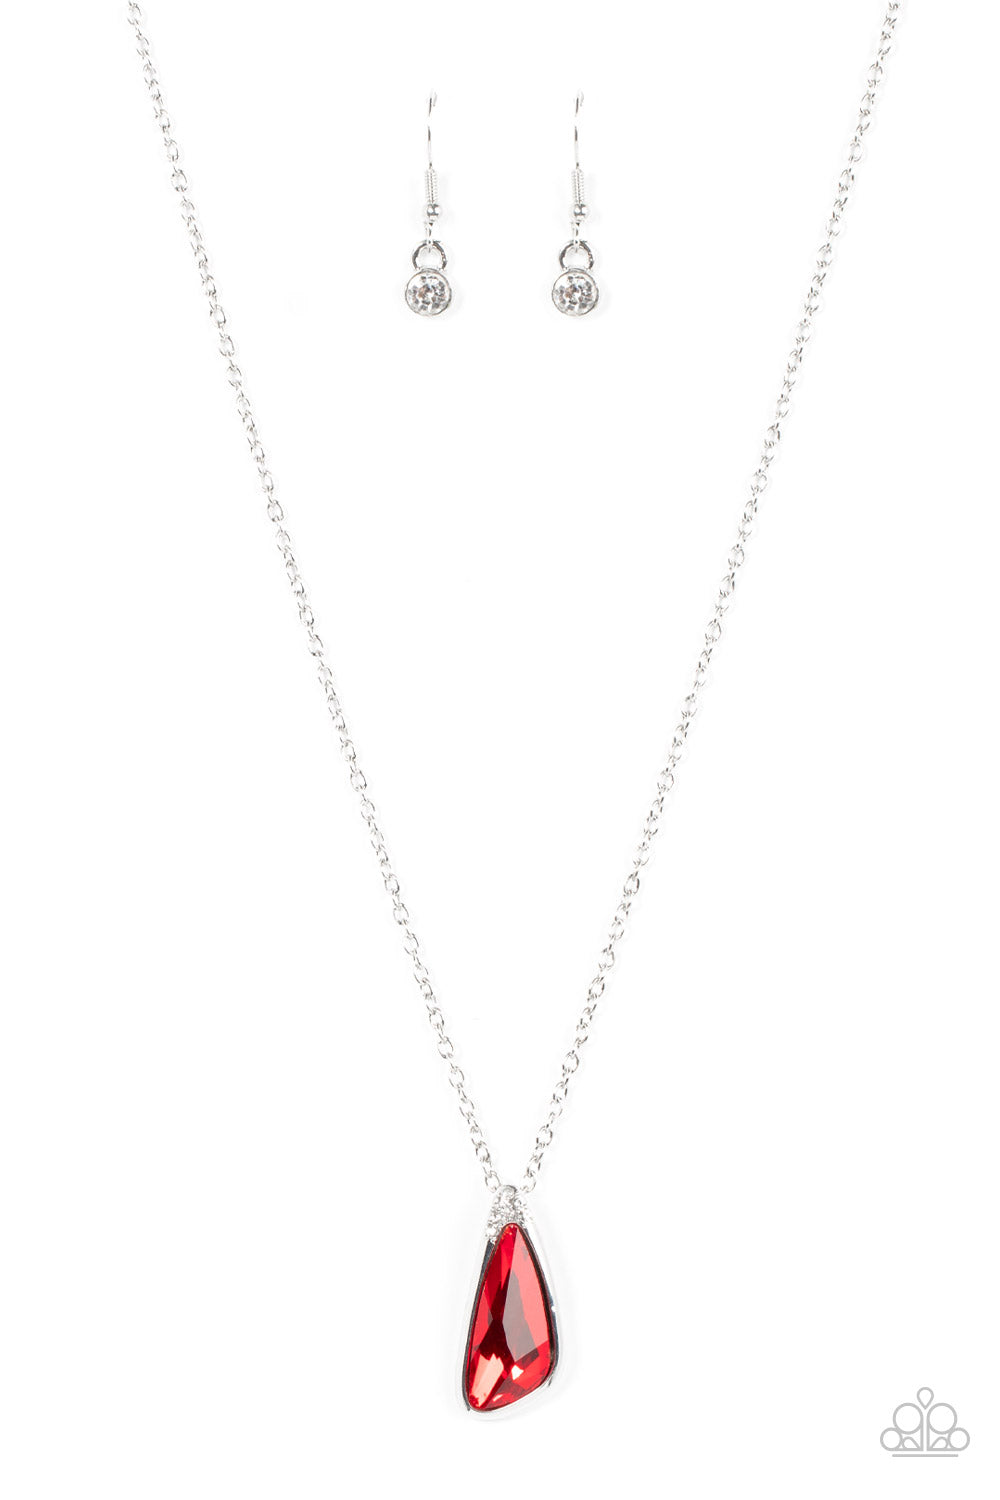 Envious Extravagance - Red Necklace